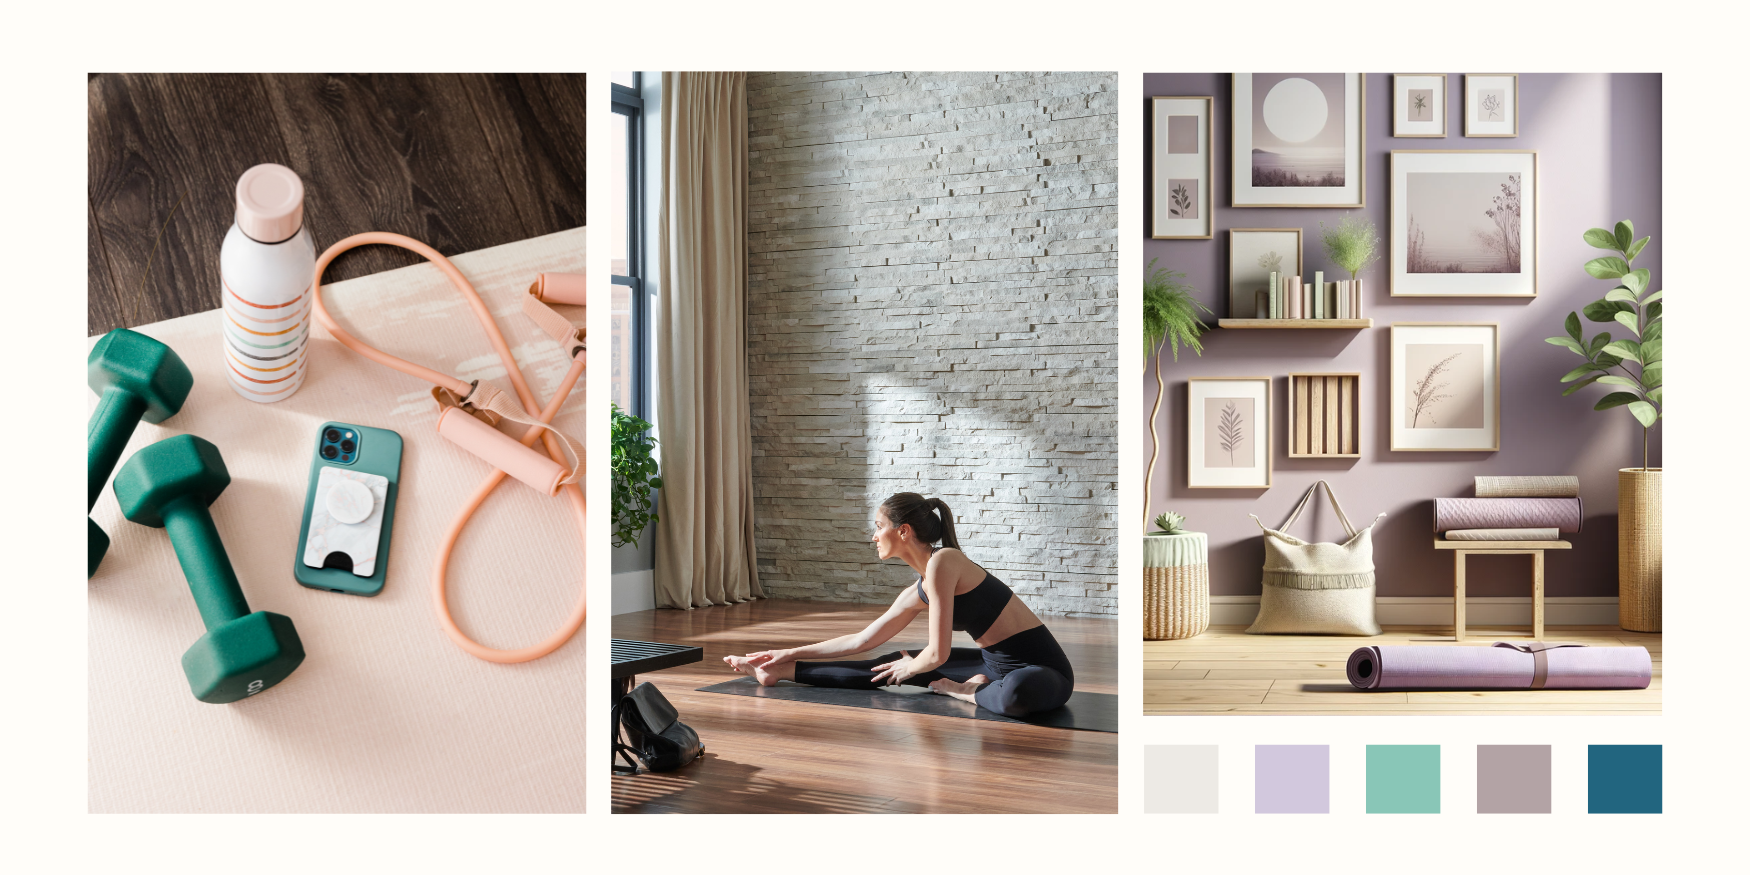 A home workout space with sea cliff - European ledge by Eldorado Stone. Fitness equipment including green dumbbells, a coral jump rope, a white and coral striped water bottle, and a smartphone with a turquoise case on a yoga mat. In the background, a woman performs a seated yoga stretch in front of a wall with a natural stone texture, symbolizing wellness integrated into home design.